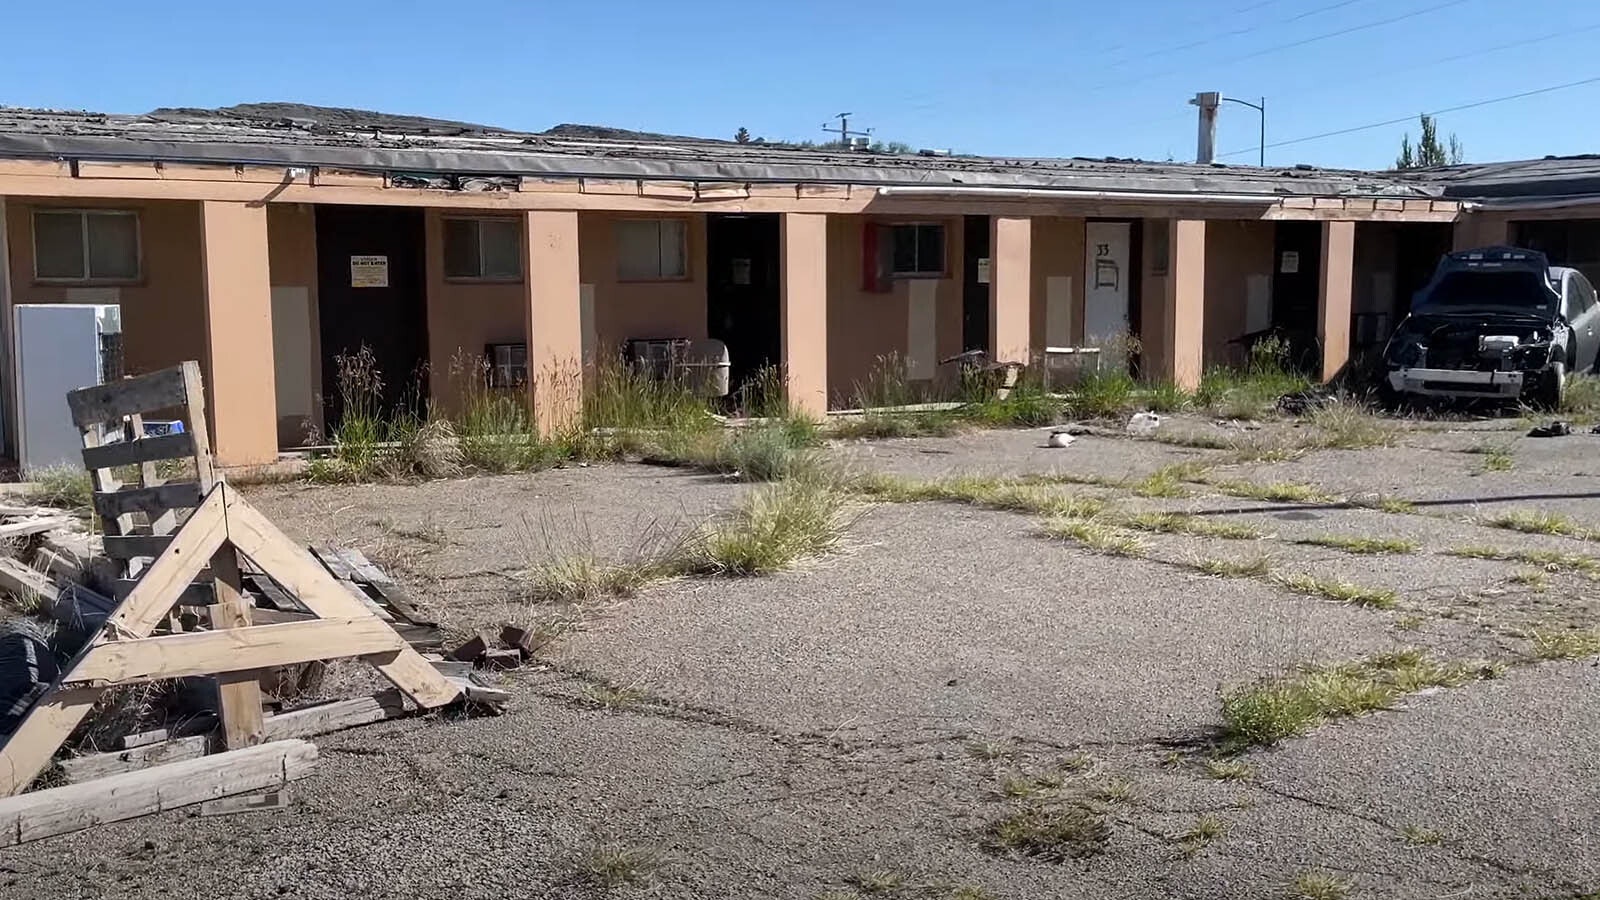 Scene of an abandoned motel in Rawlins for Nick Johnson's YouTube video.